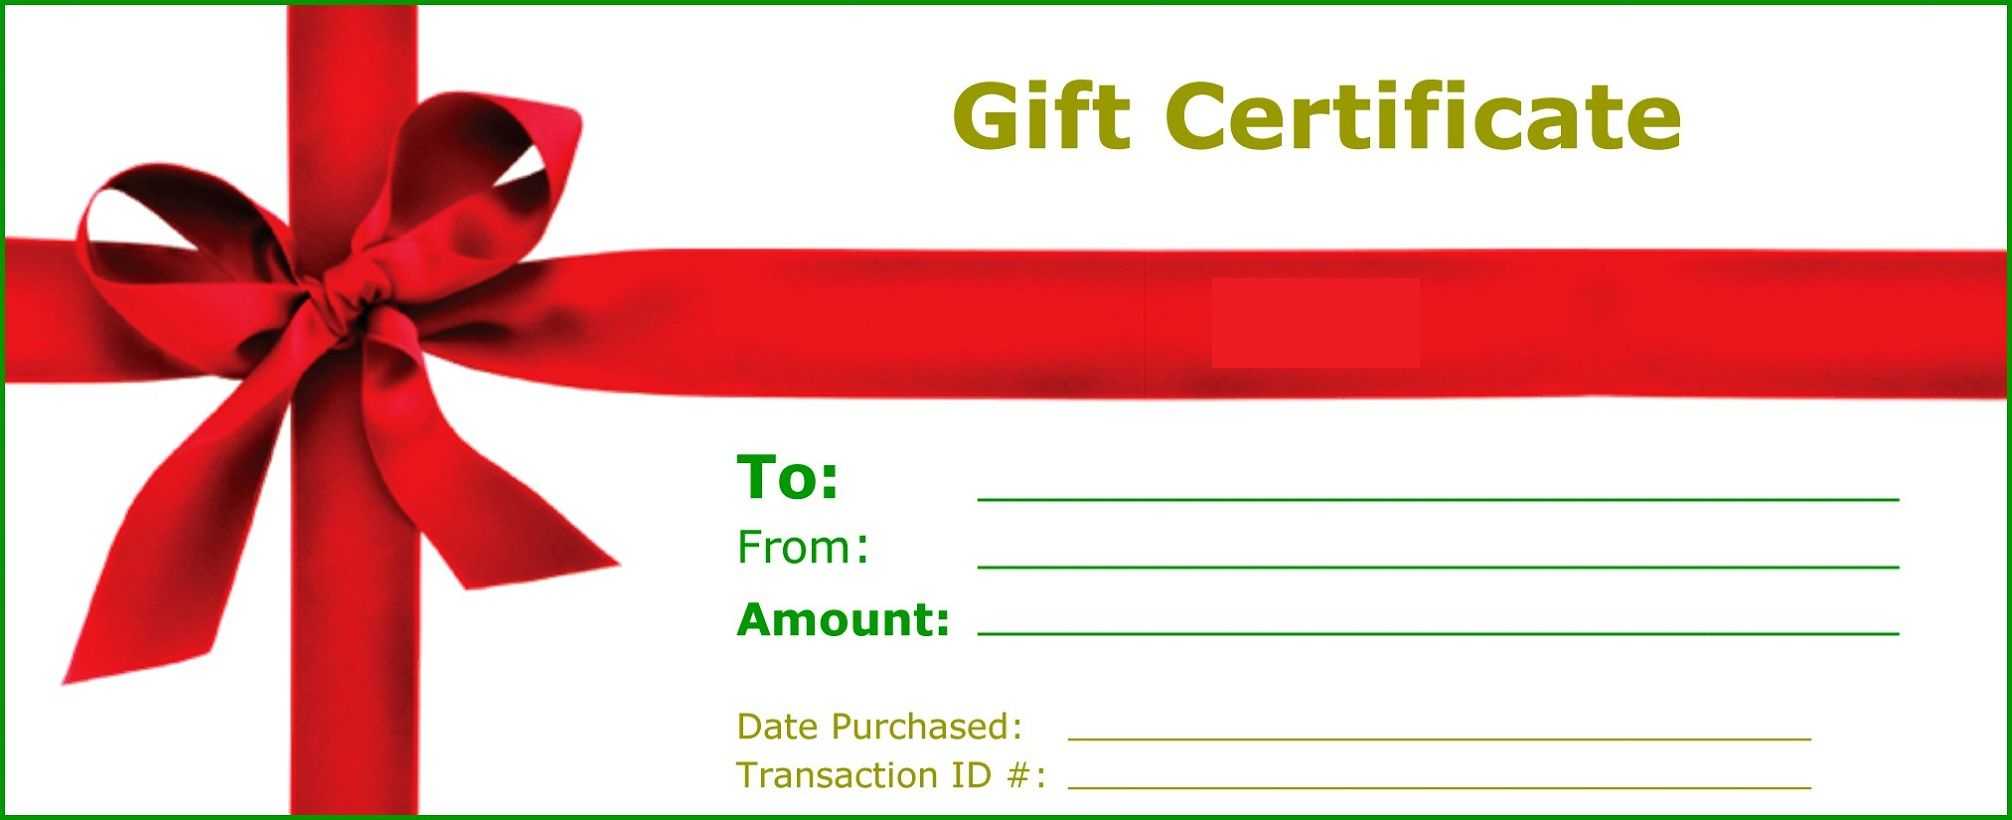 Gift Certificate Templates To Print | Gift Certificate Inside Massage Gift Certificate Template Free Download